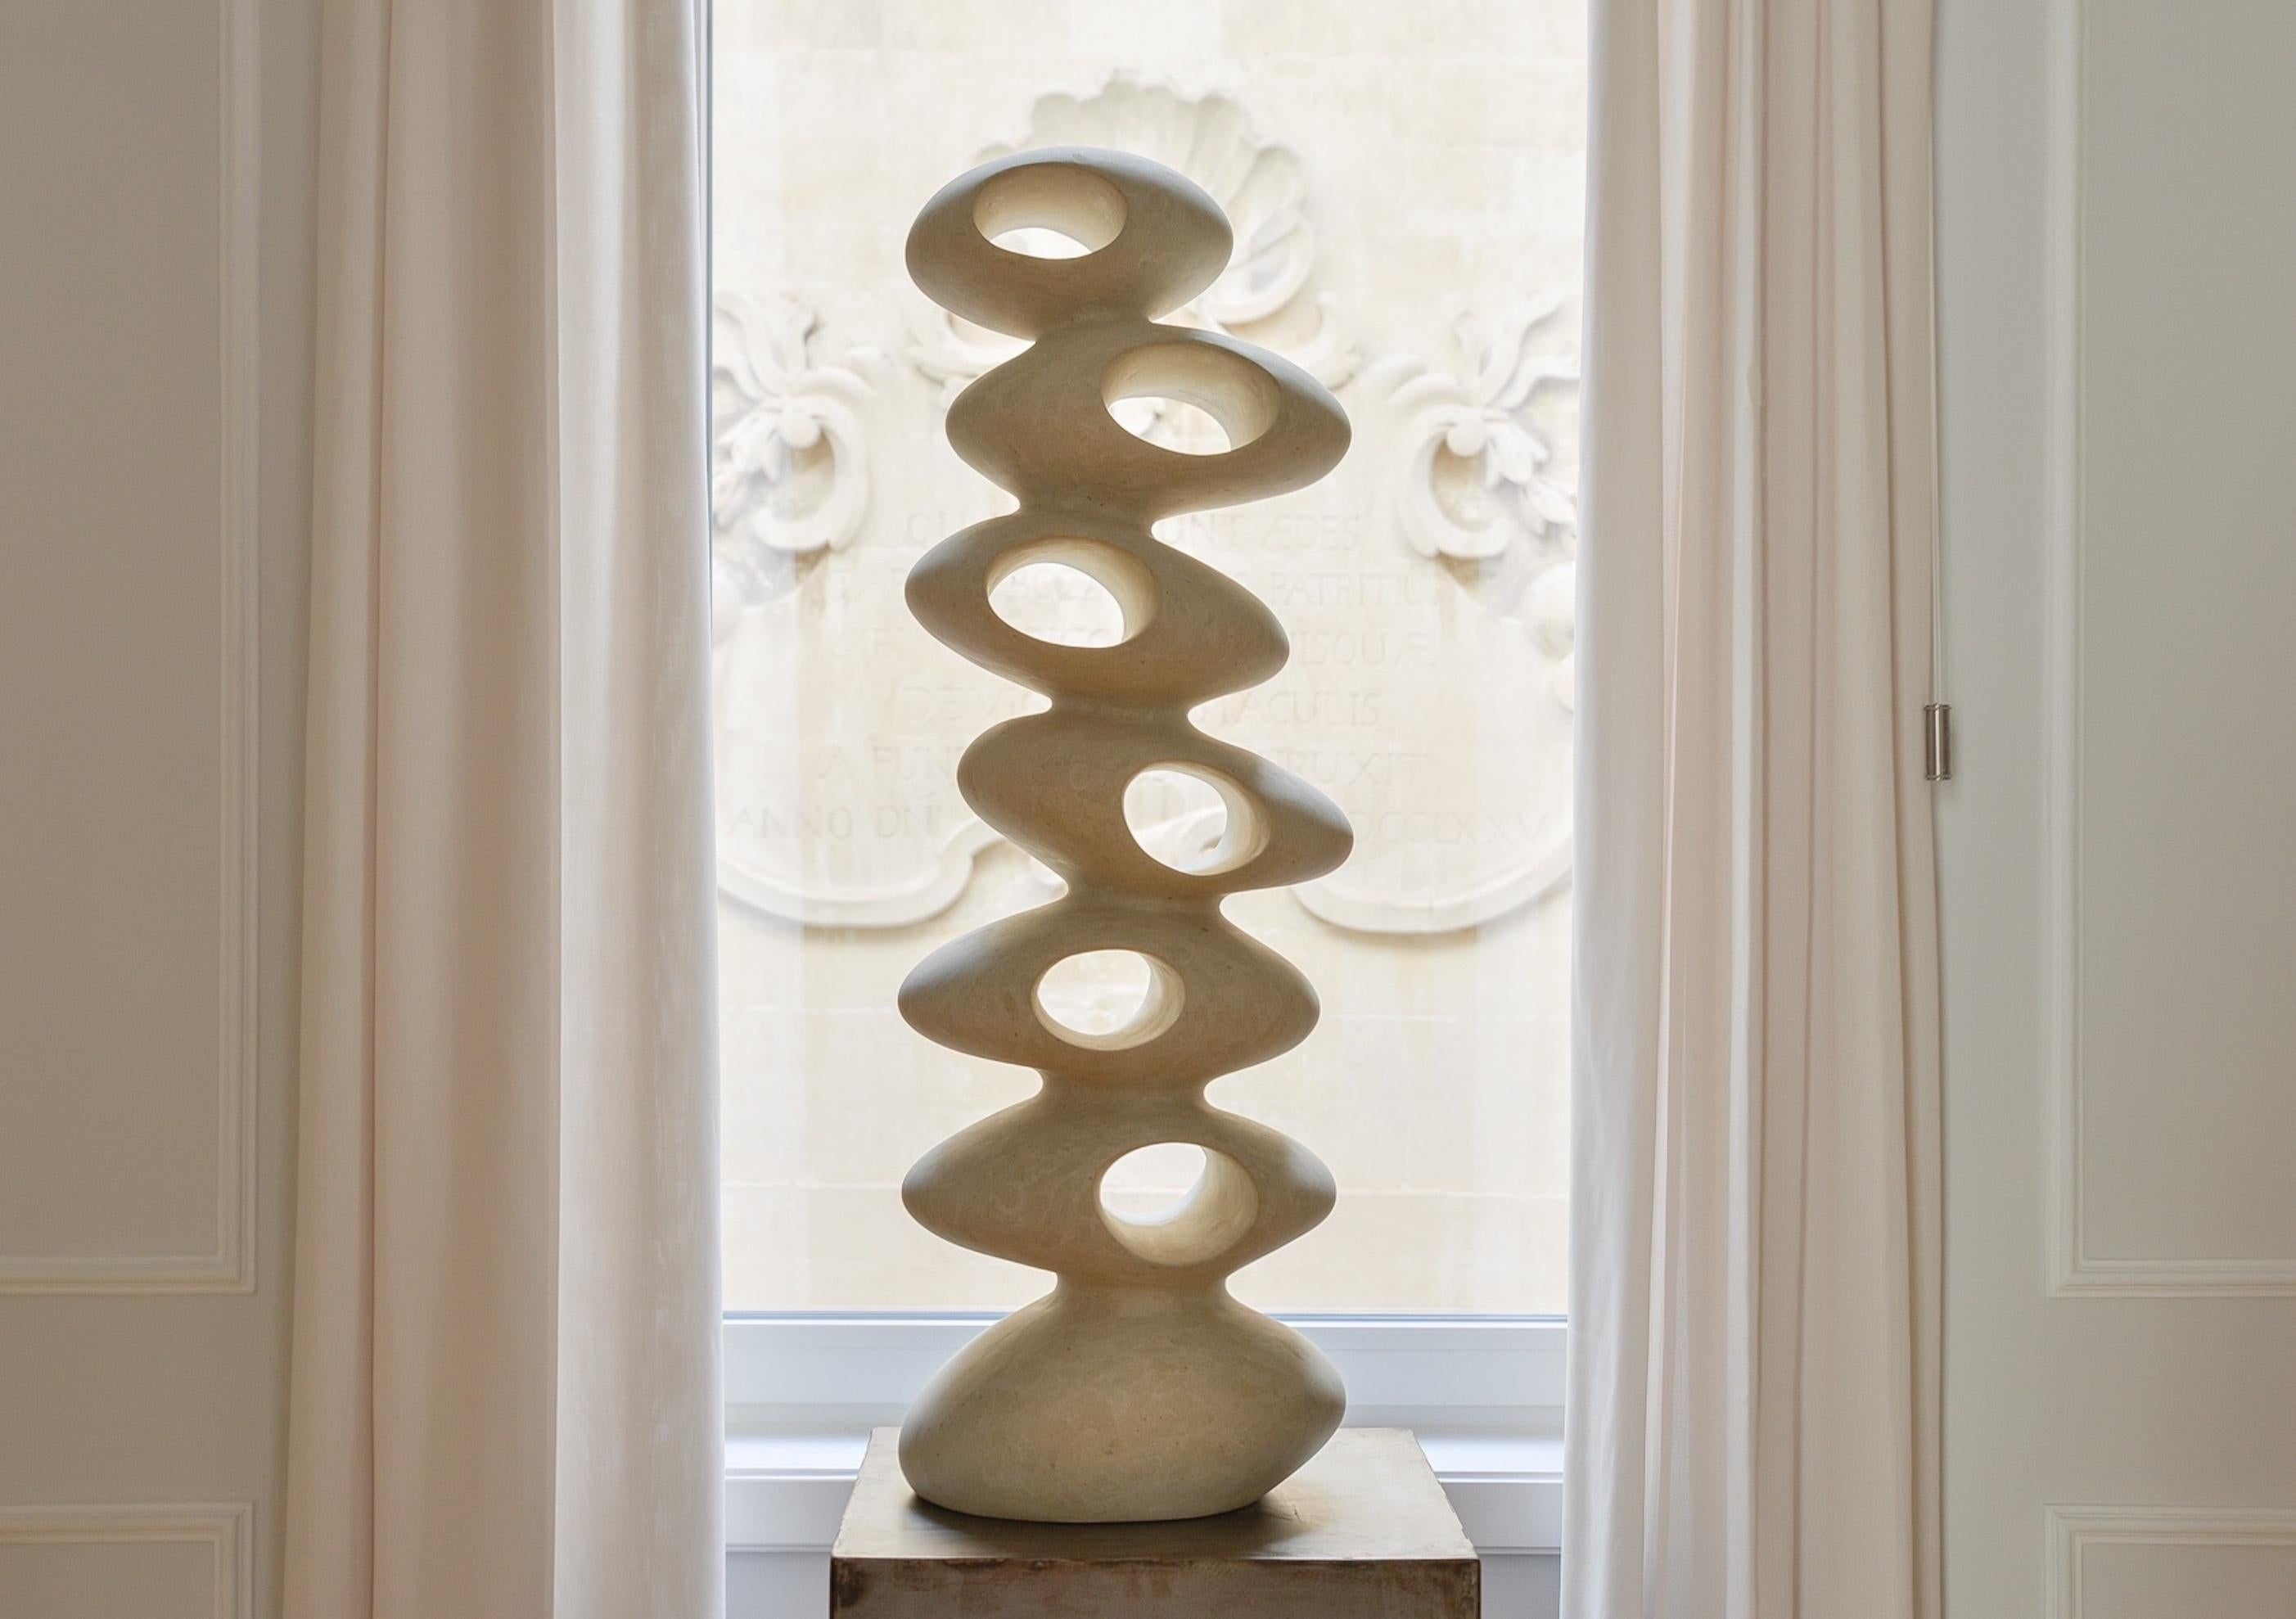 21st century abstract sculpture INASIS by Renzo Buttazzo from Italy

Sculpture in Lecce Stone
Delivered with a certificate of authenticity (dated & signed)
Contact us on 1stDibs to acquire a different size than the one shown here (80x17x12 cm